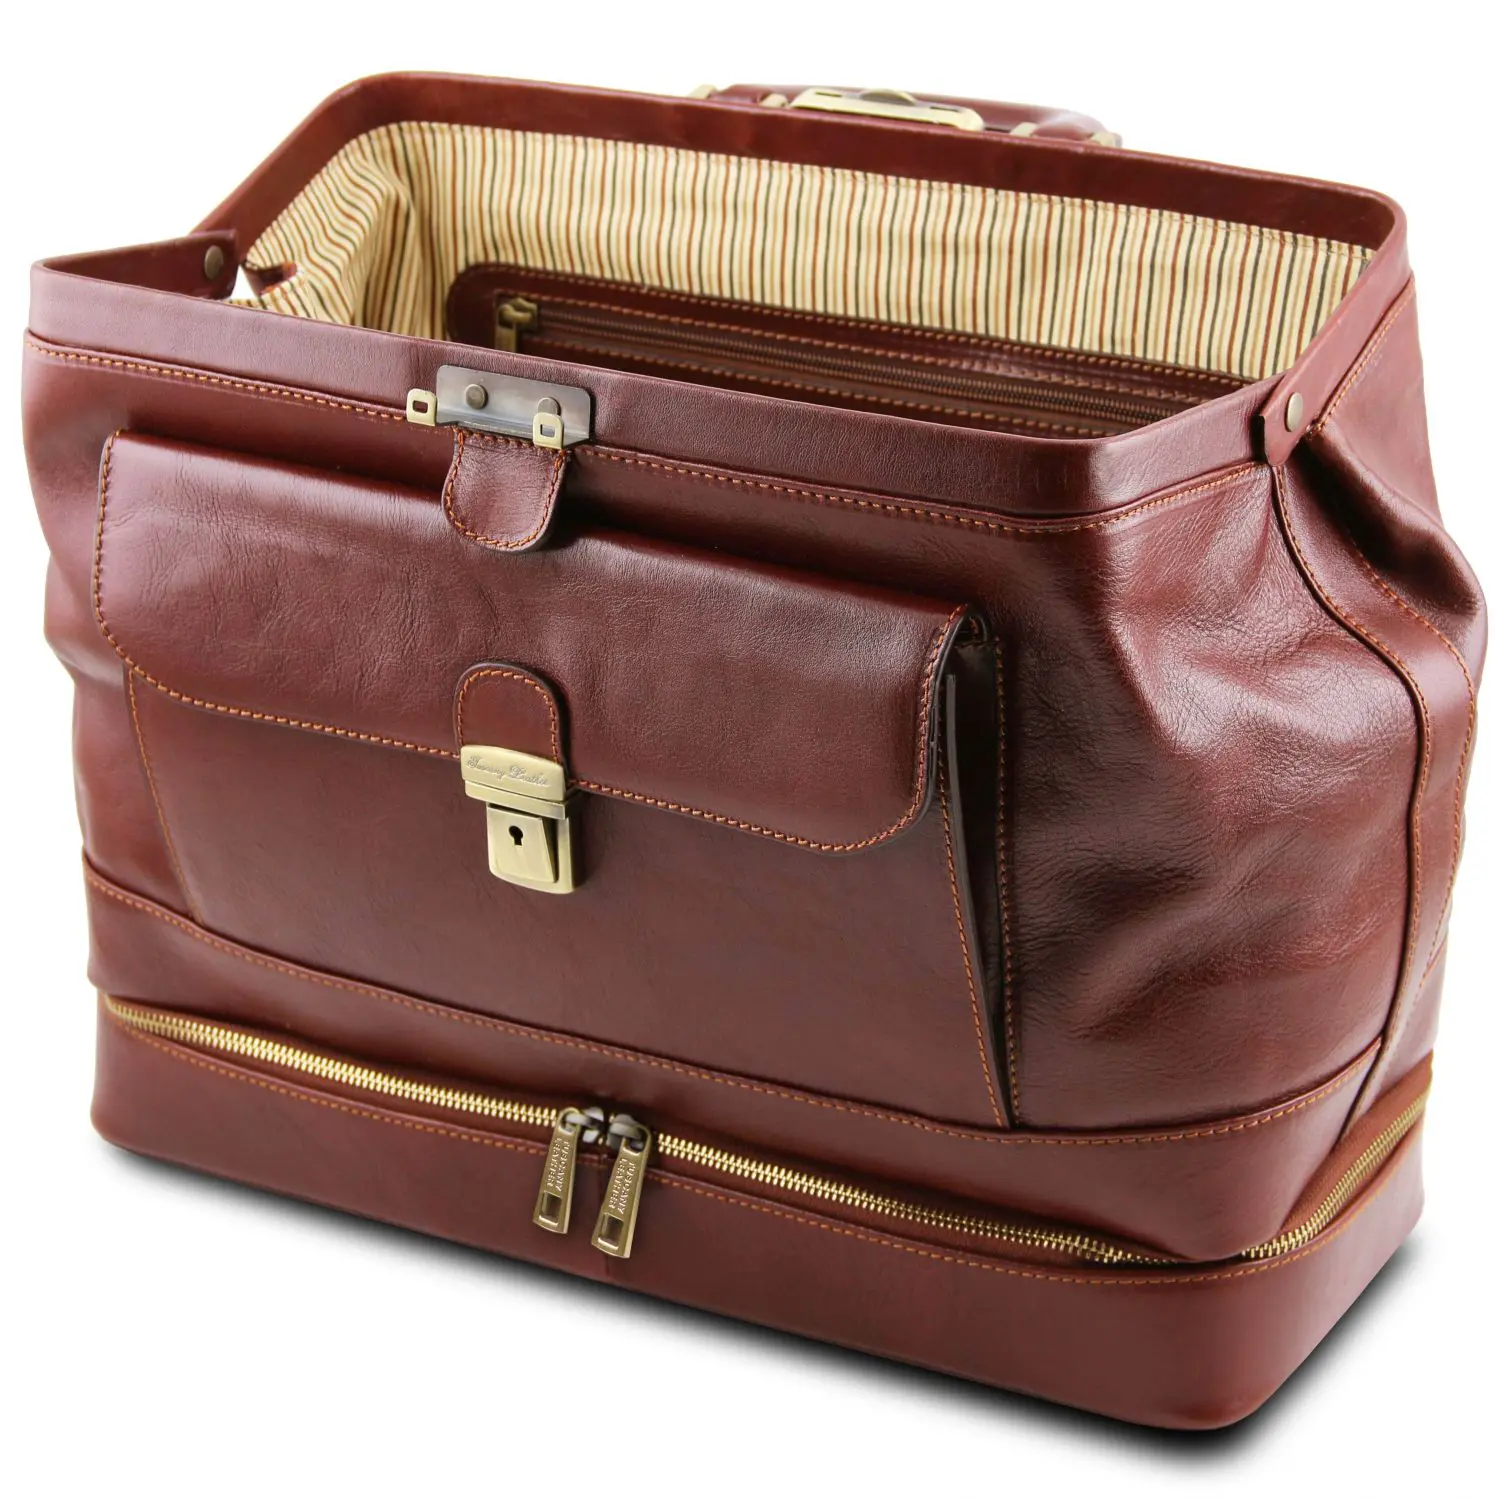 Shoulder Strap and Double Bottom Exclusive Doctor Bag in Genuine Leather Made in Italy